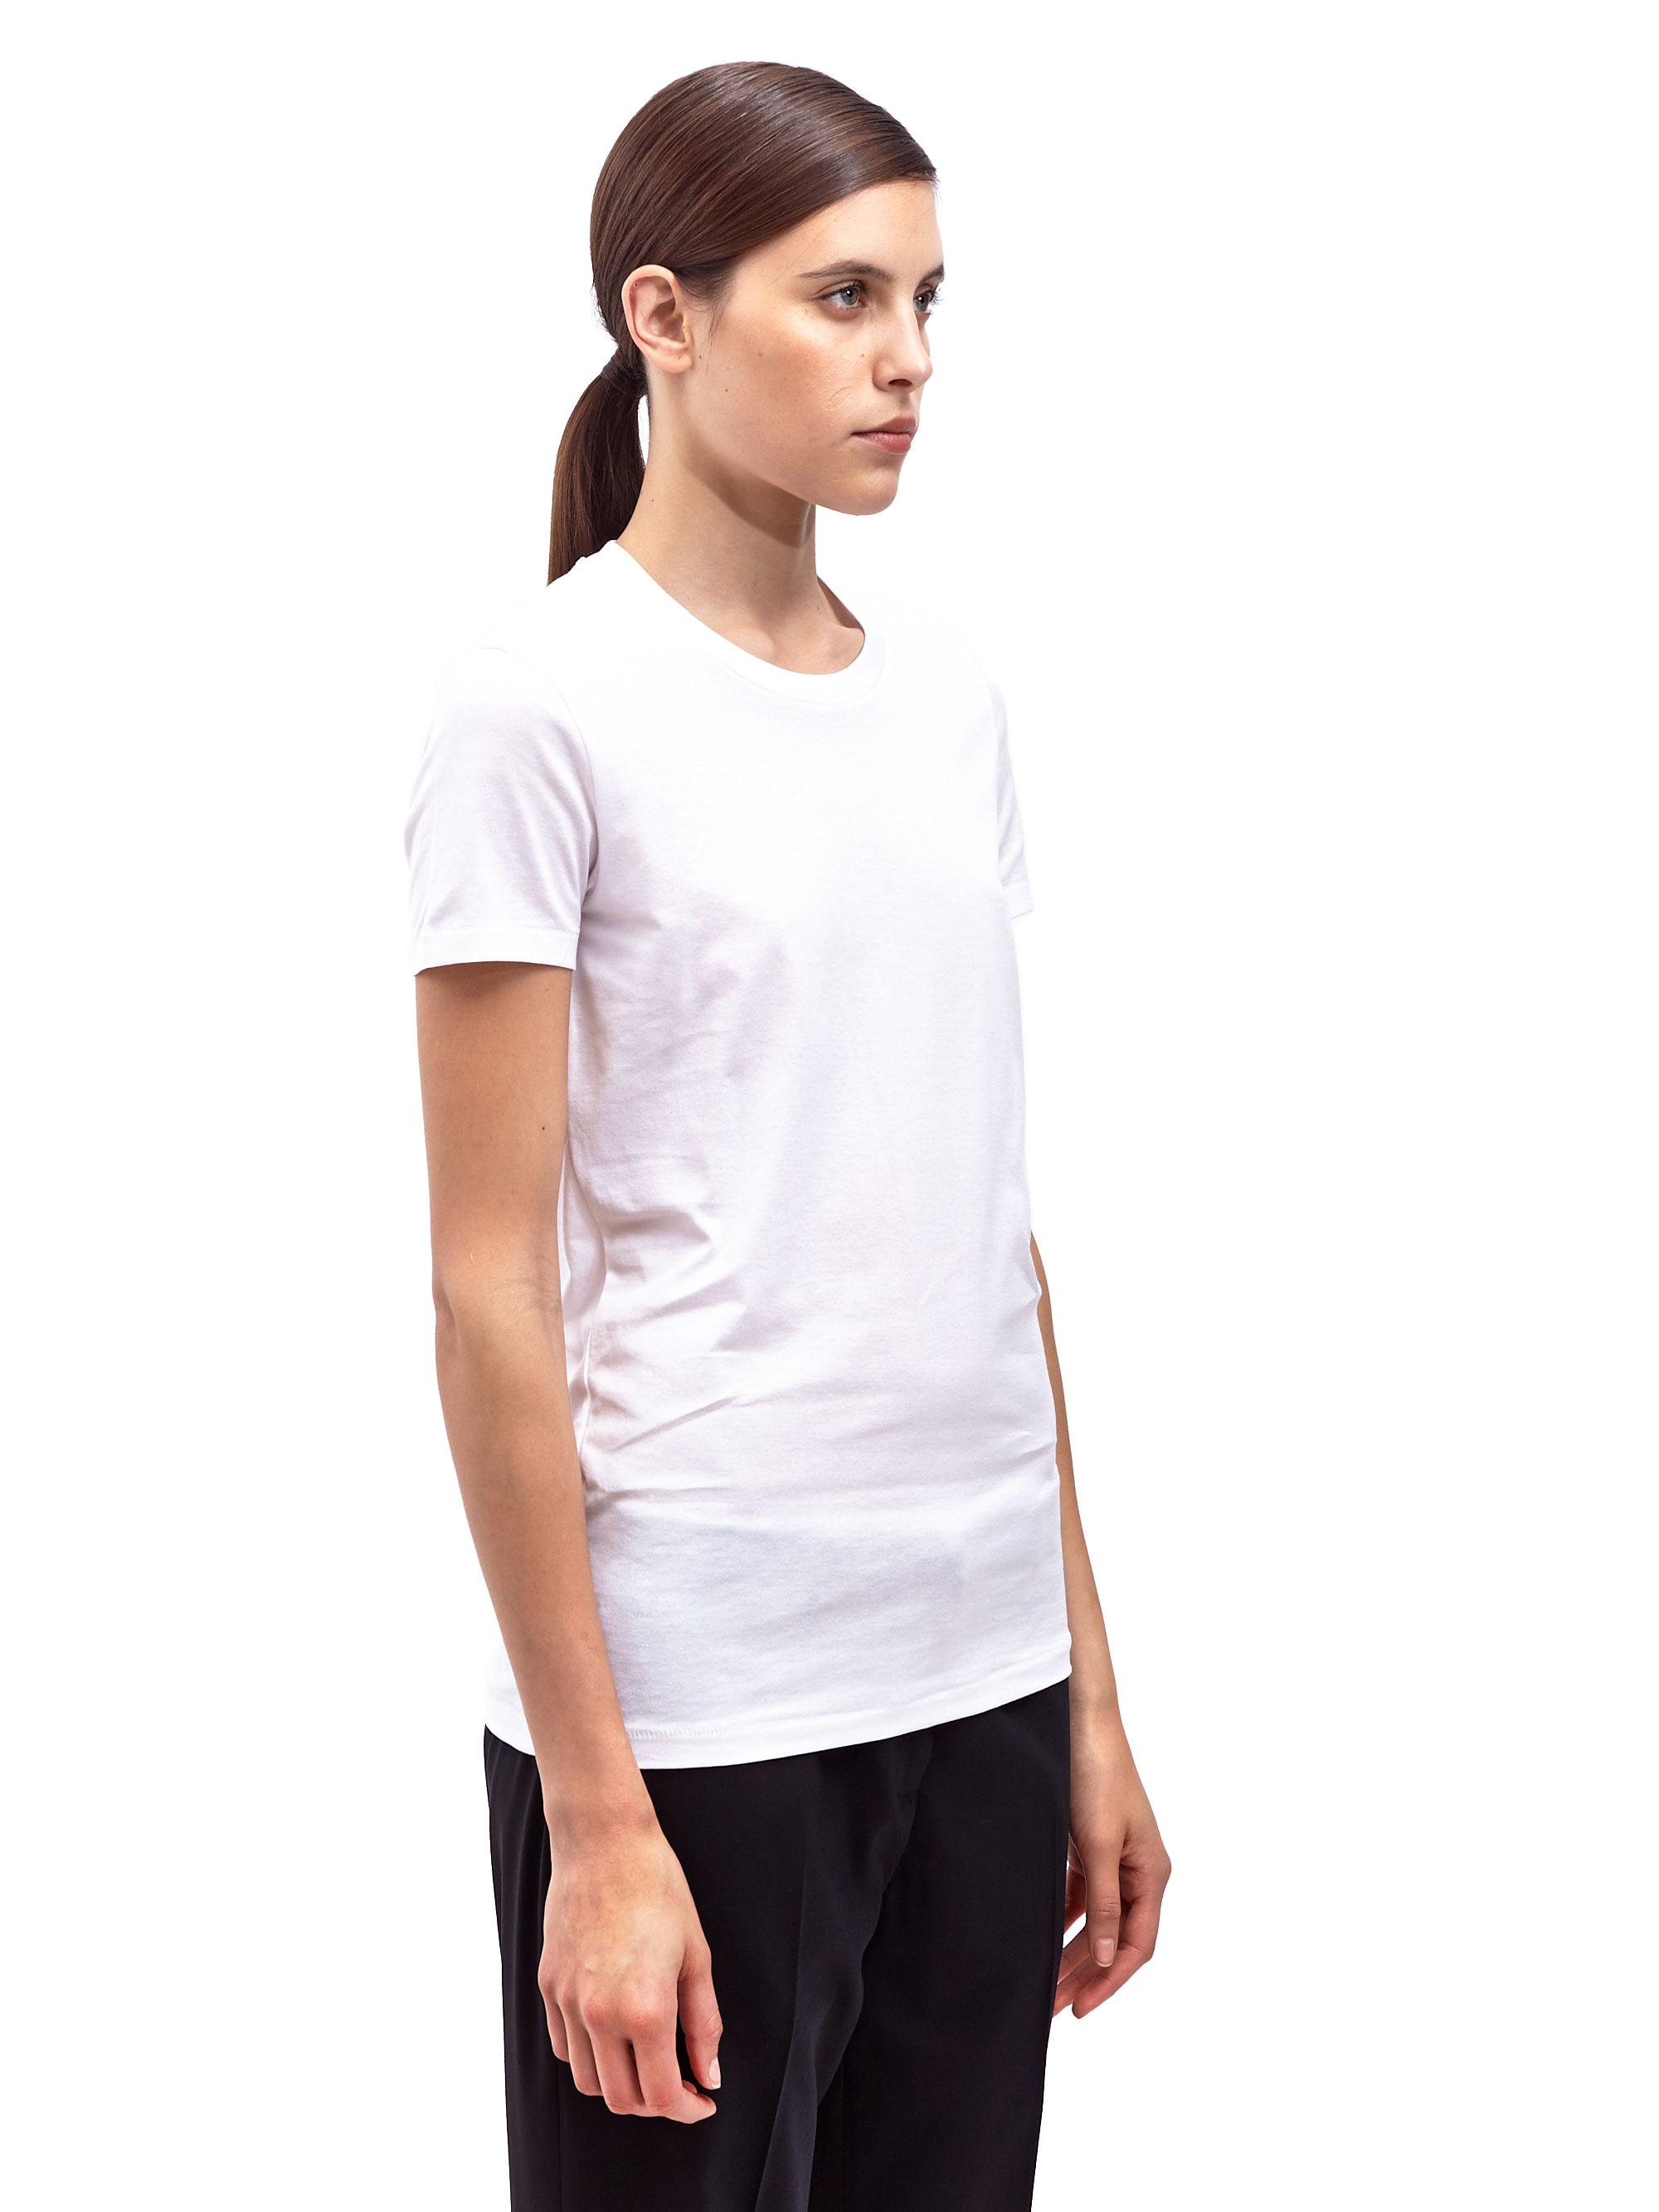 Lyst - Acne Studios Womens Bliss Classic Crew Neck T-Shirt in White